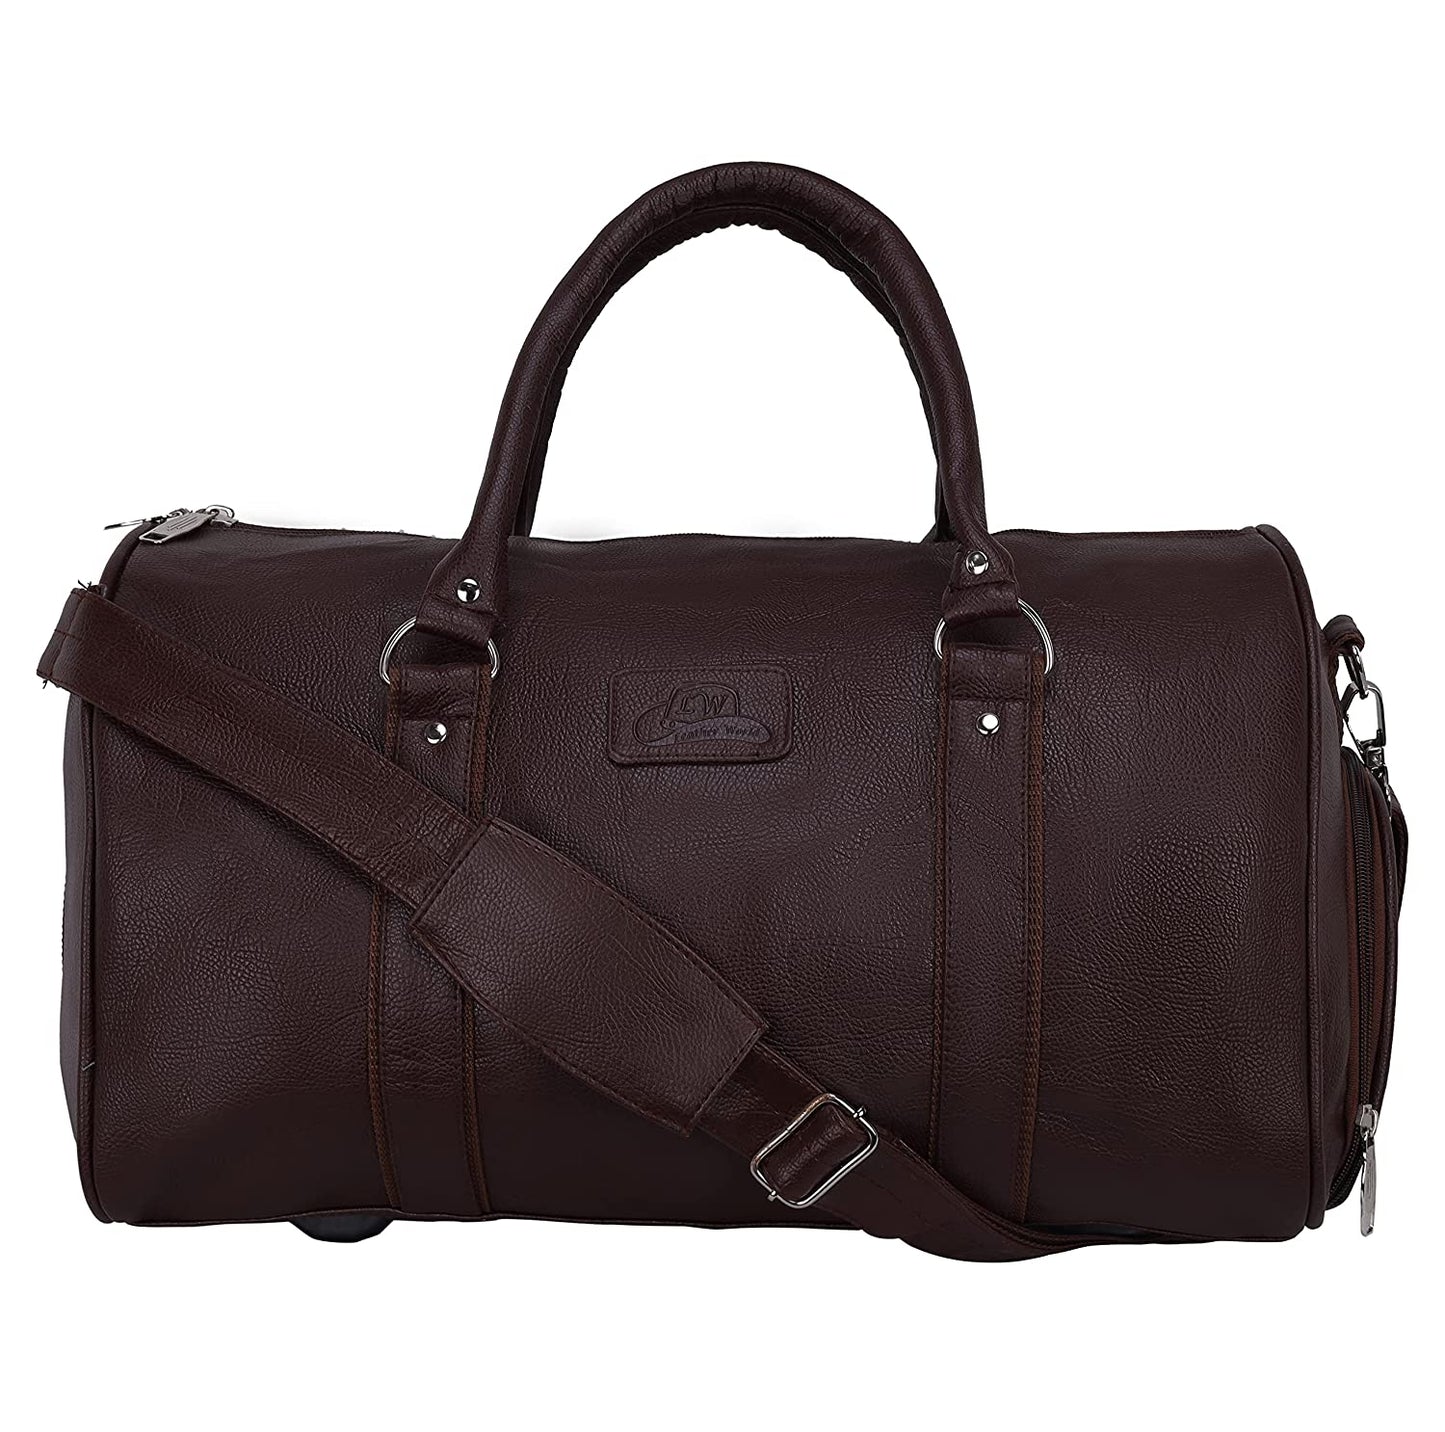 Leather World Brown Pu Leather Sports Gym Duffle Bag with Shoe Compartment